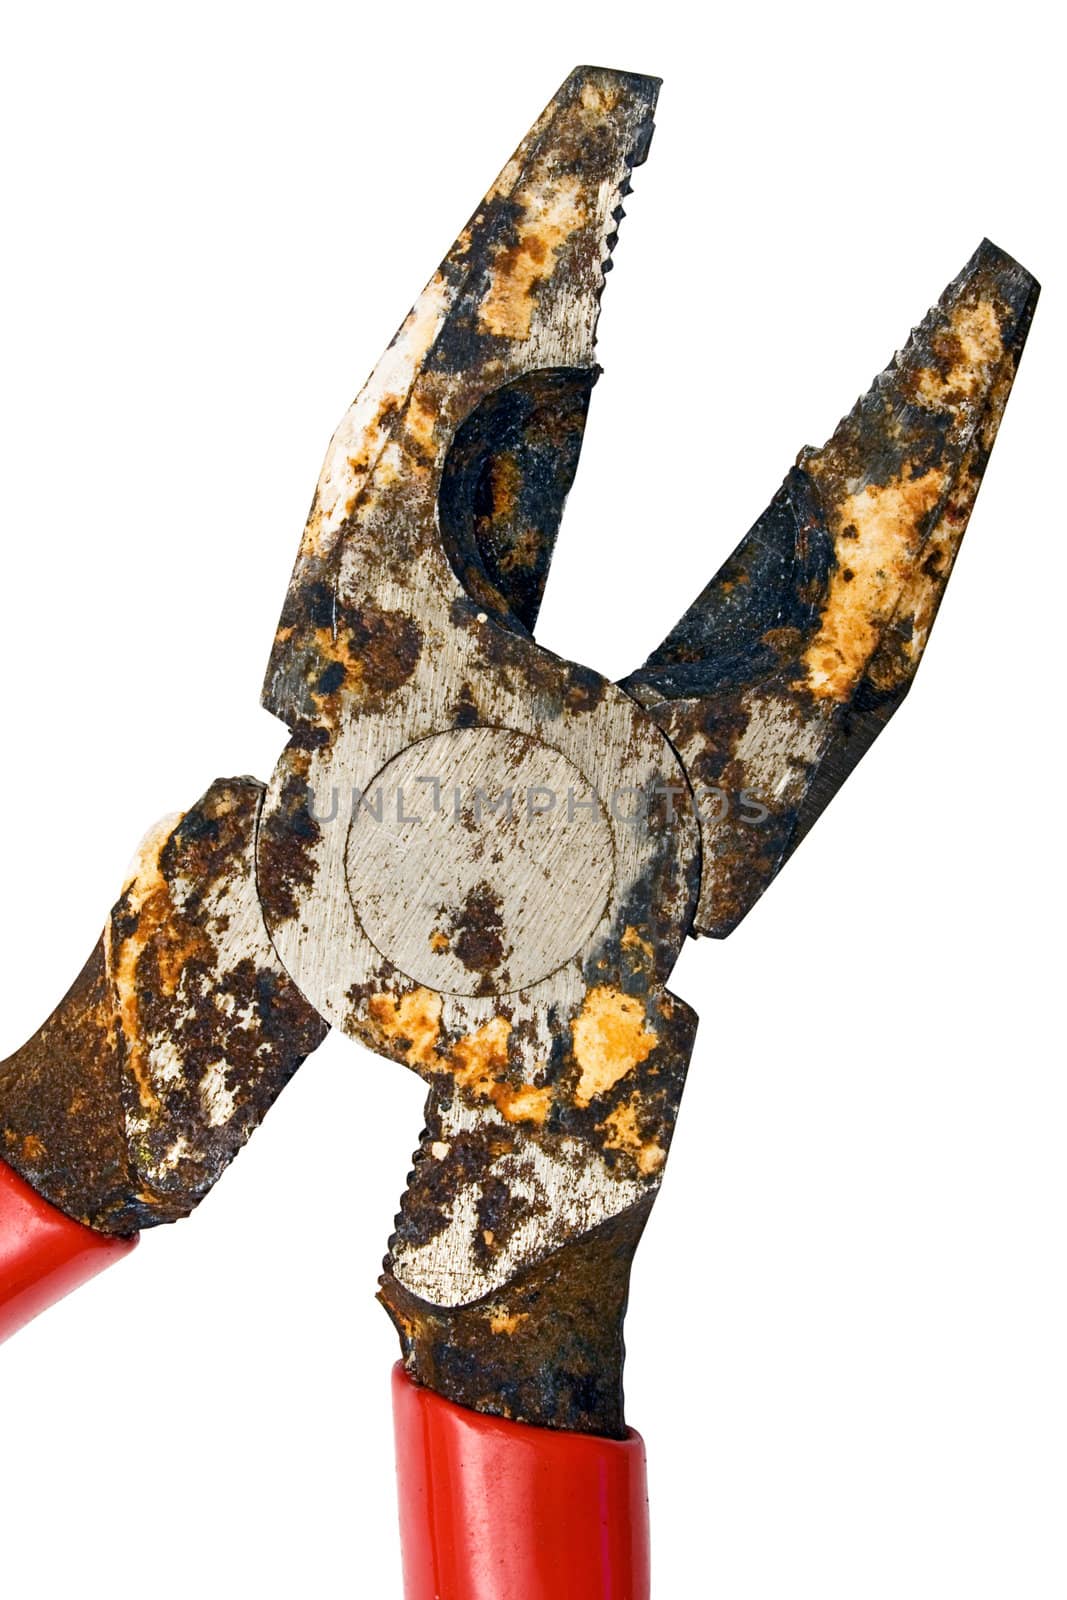 Rusty Pliers with Clipping Path by winterling